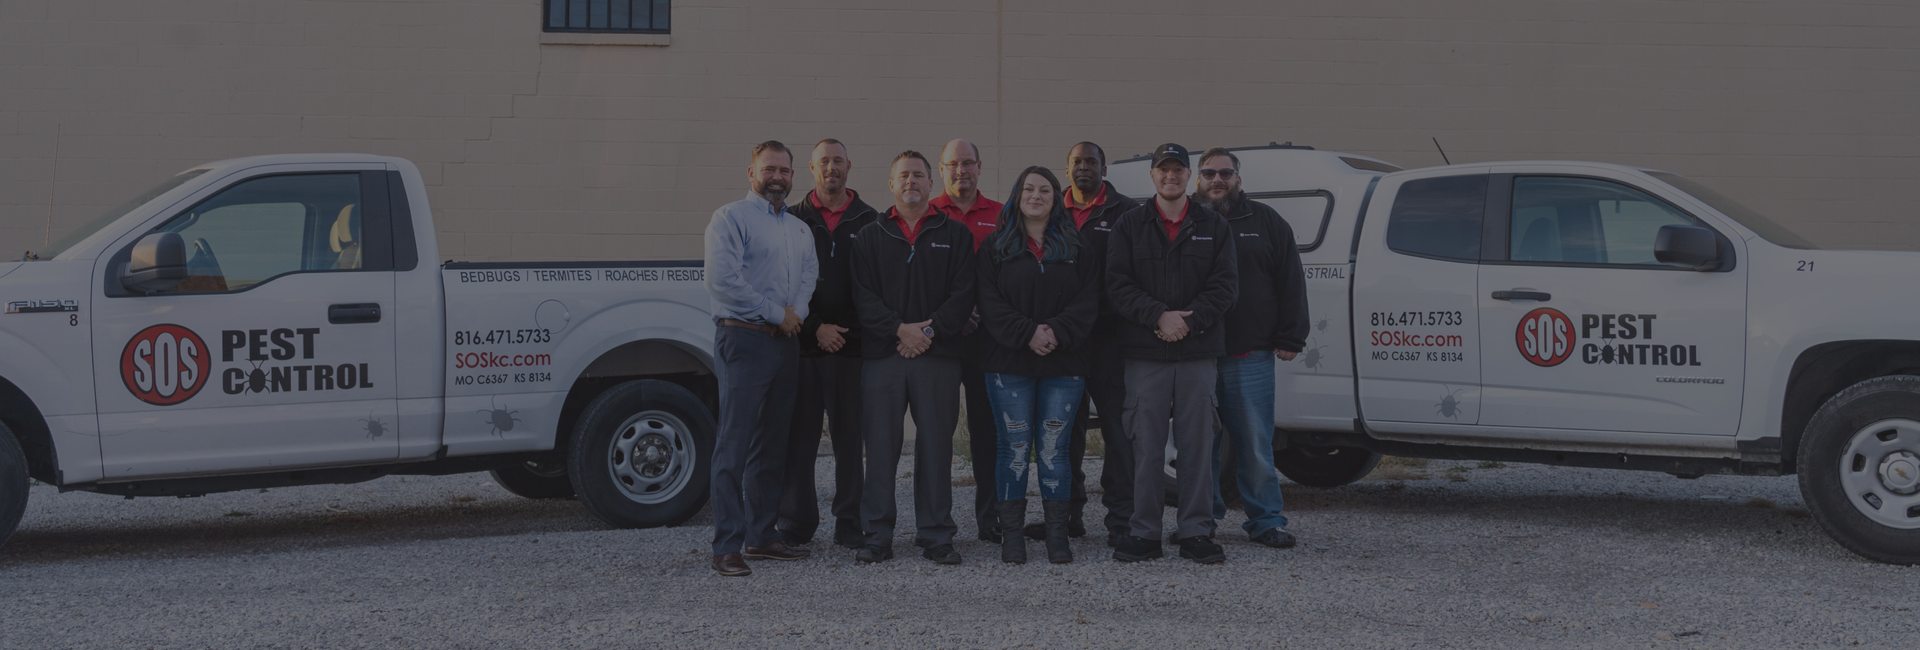 The team members of SOS Pest Control posing outside in front of service trucks.